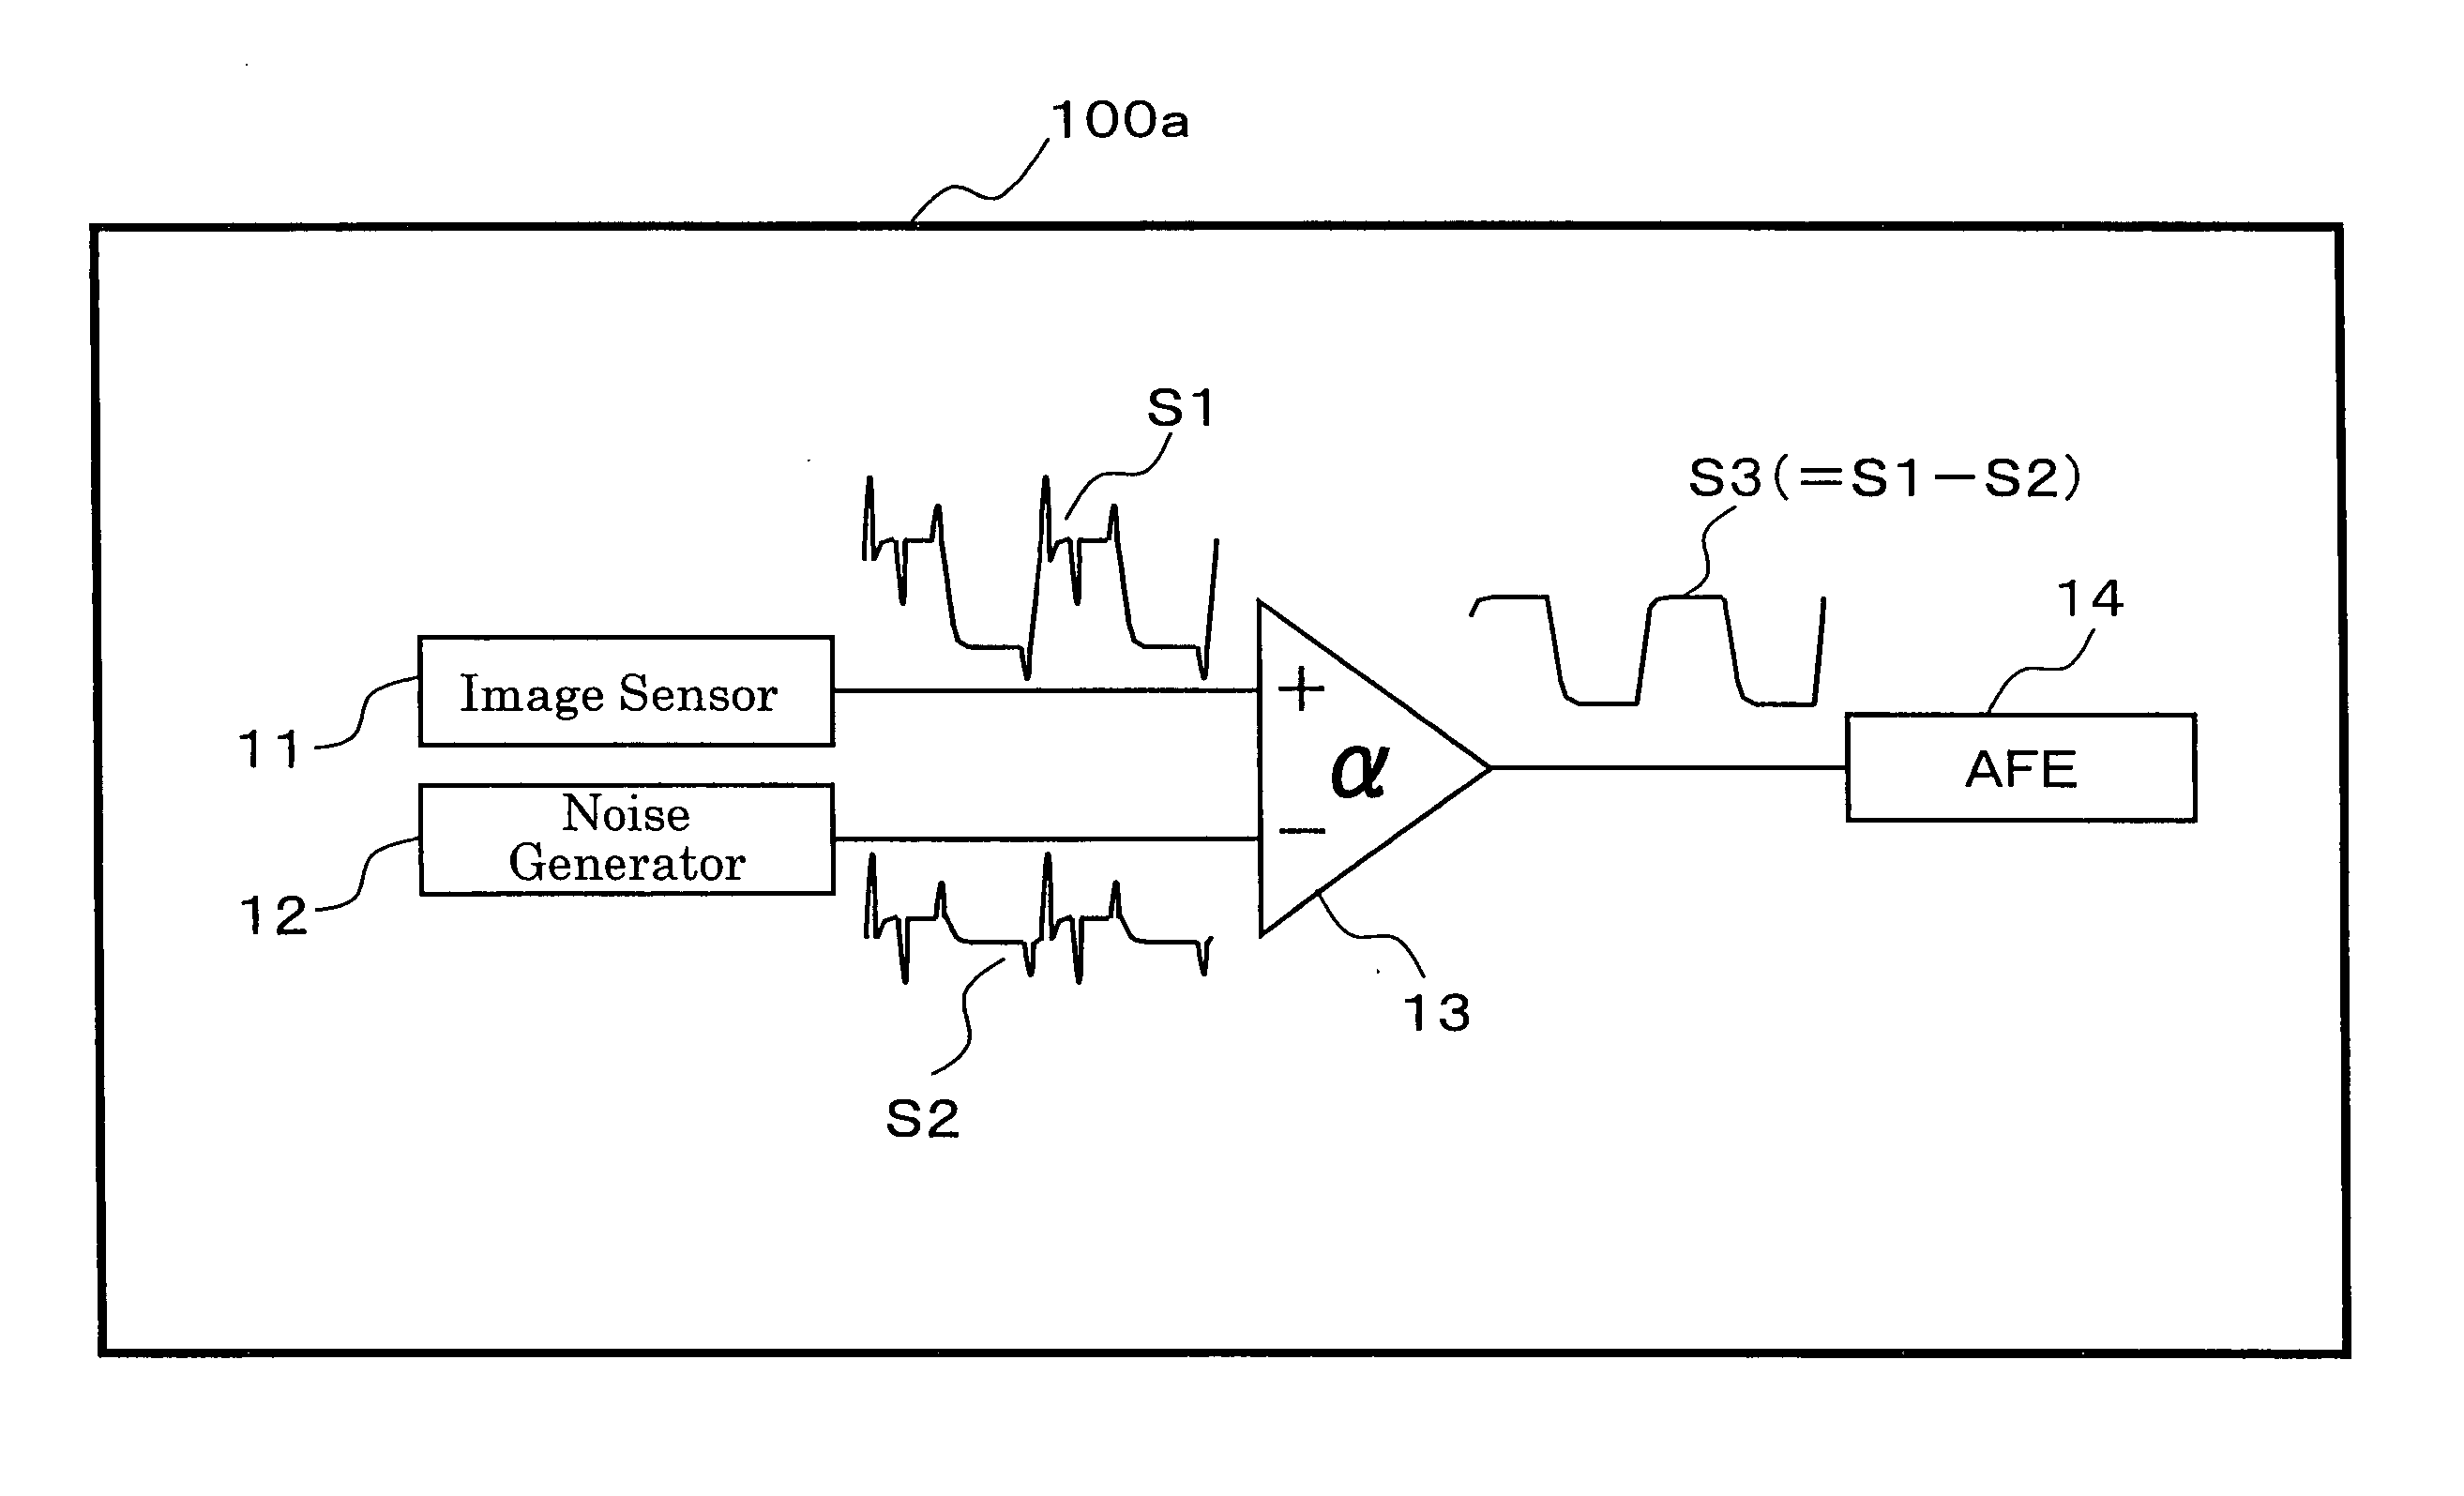 Noise removing device for image sensor